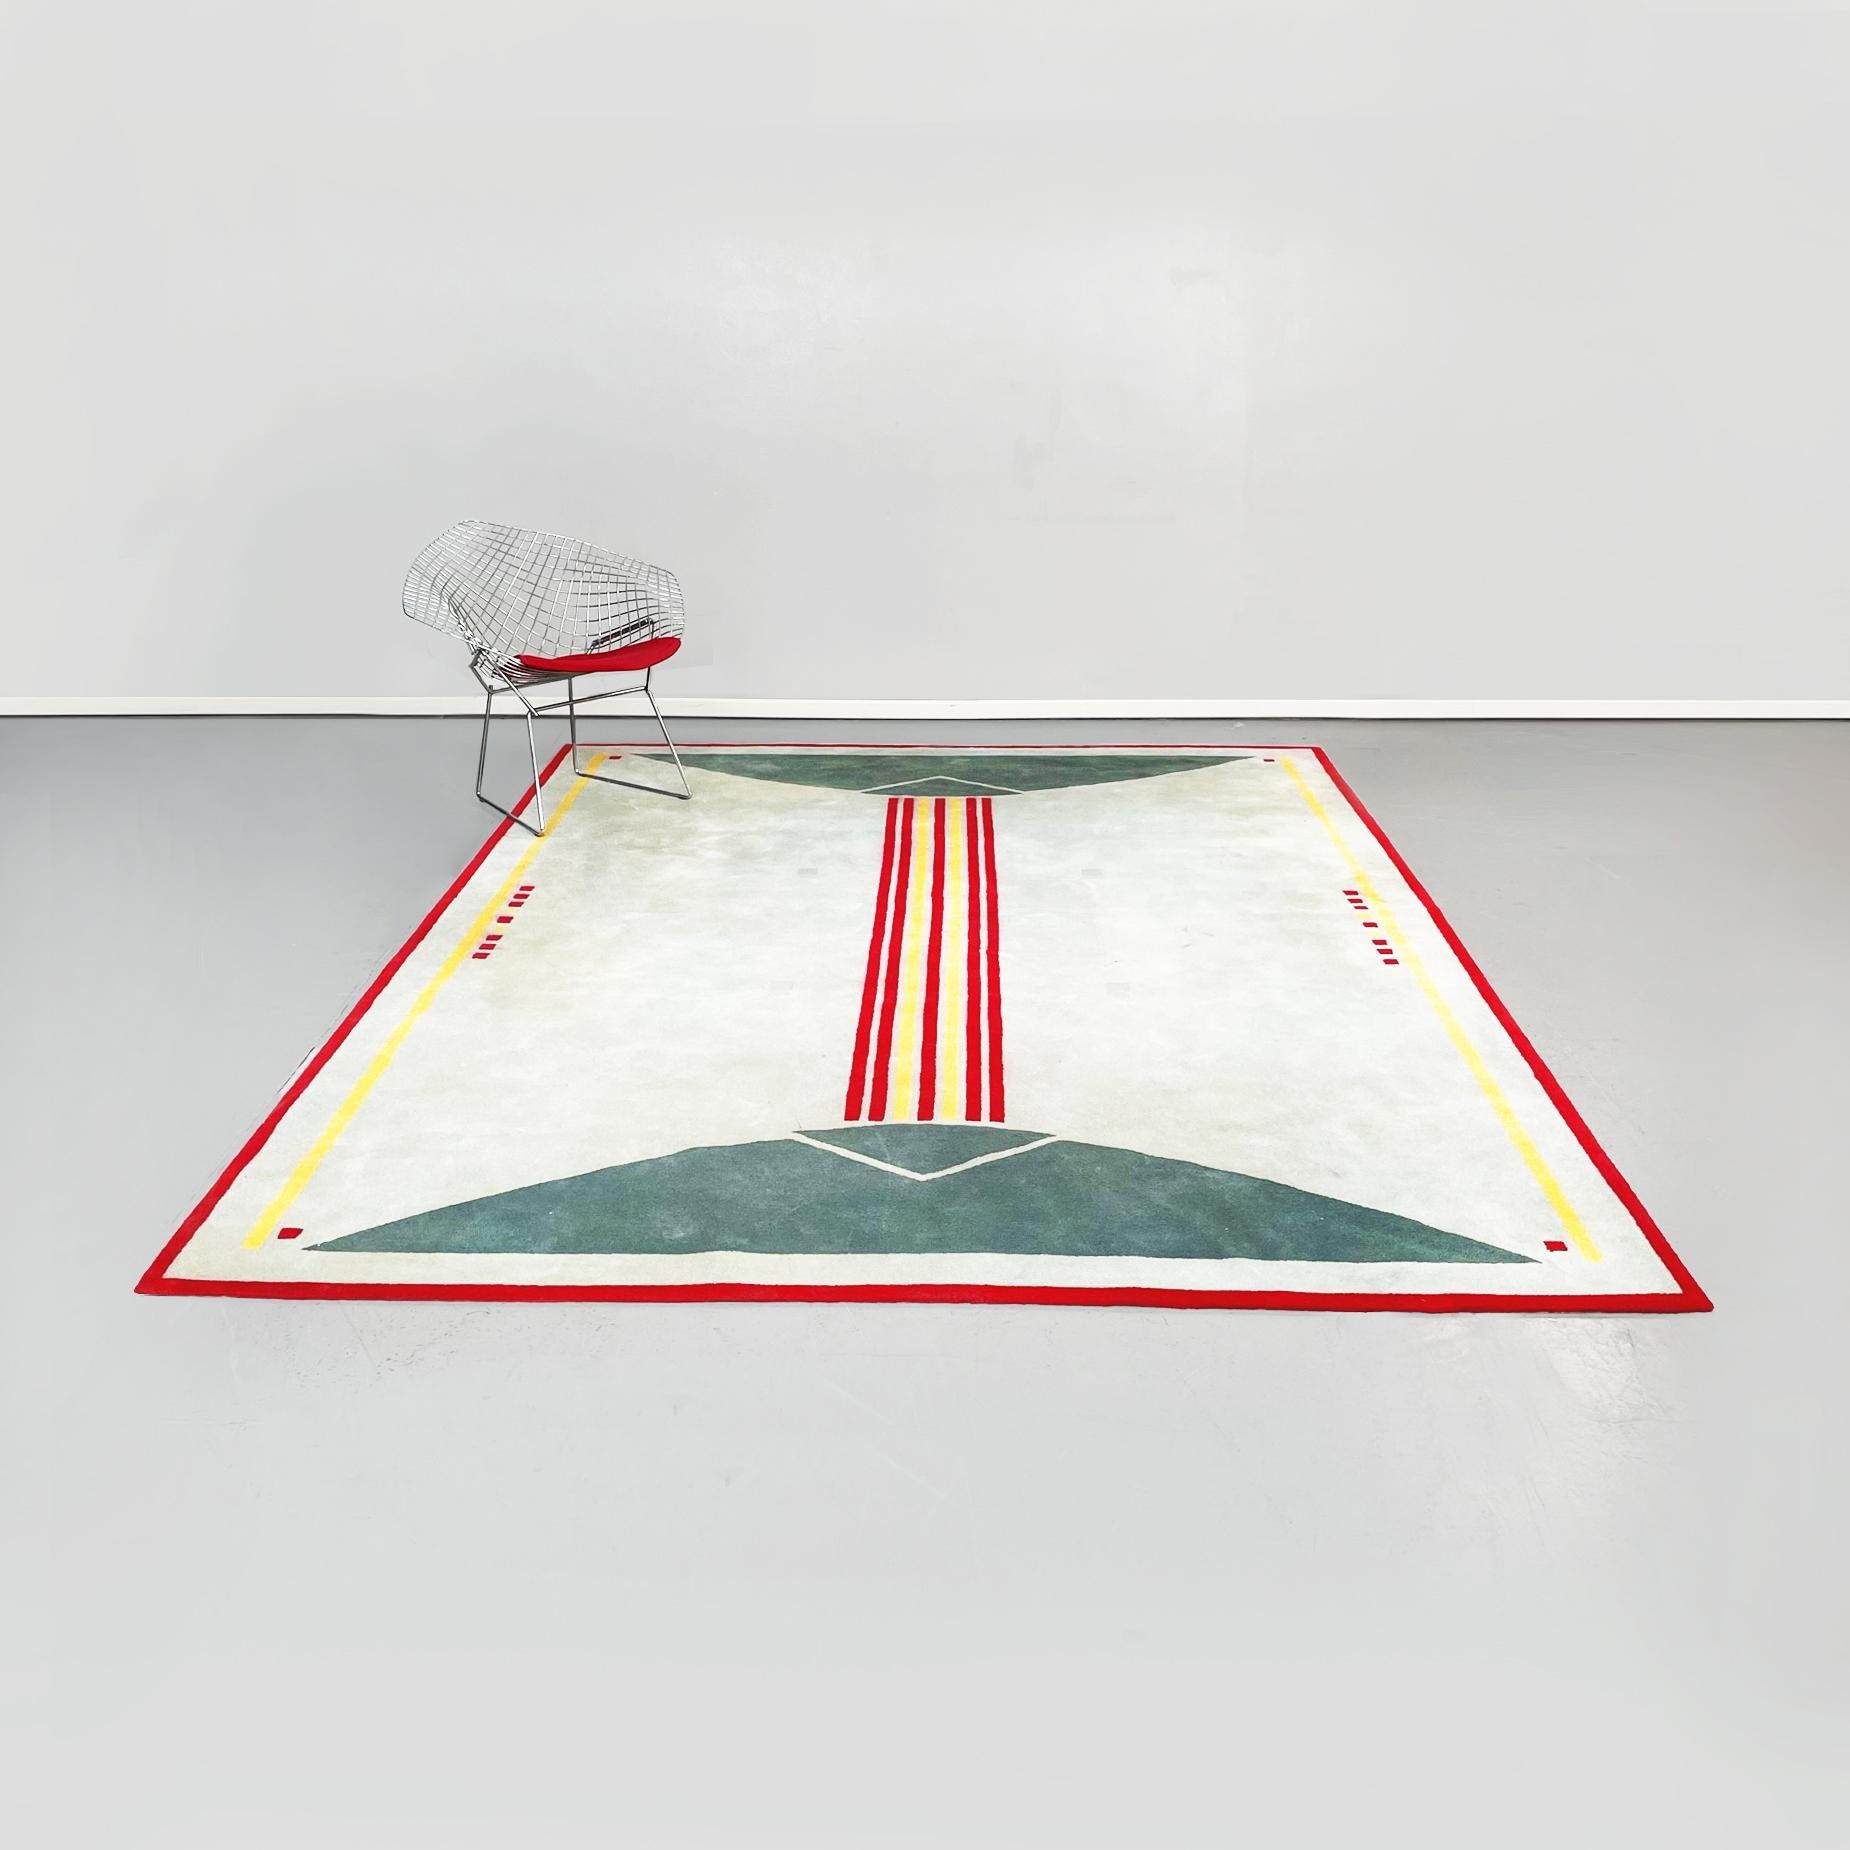 Italian Mid-Century Modern rectangular short pile carpet in yellow, green and red, 1980s
Rectangular short pile carpet. The carpet has mainly light blue and dark green colors, with some hints of yellow and red. In the center there are central